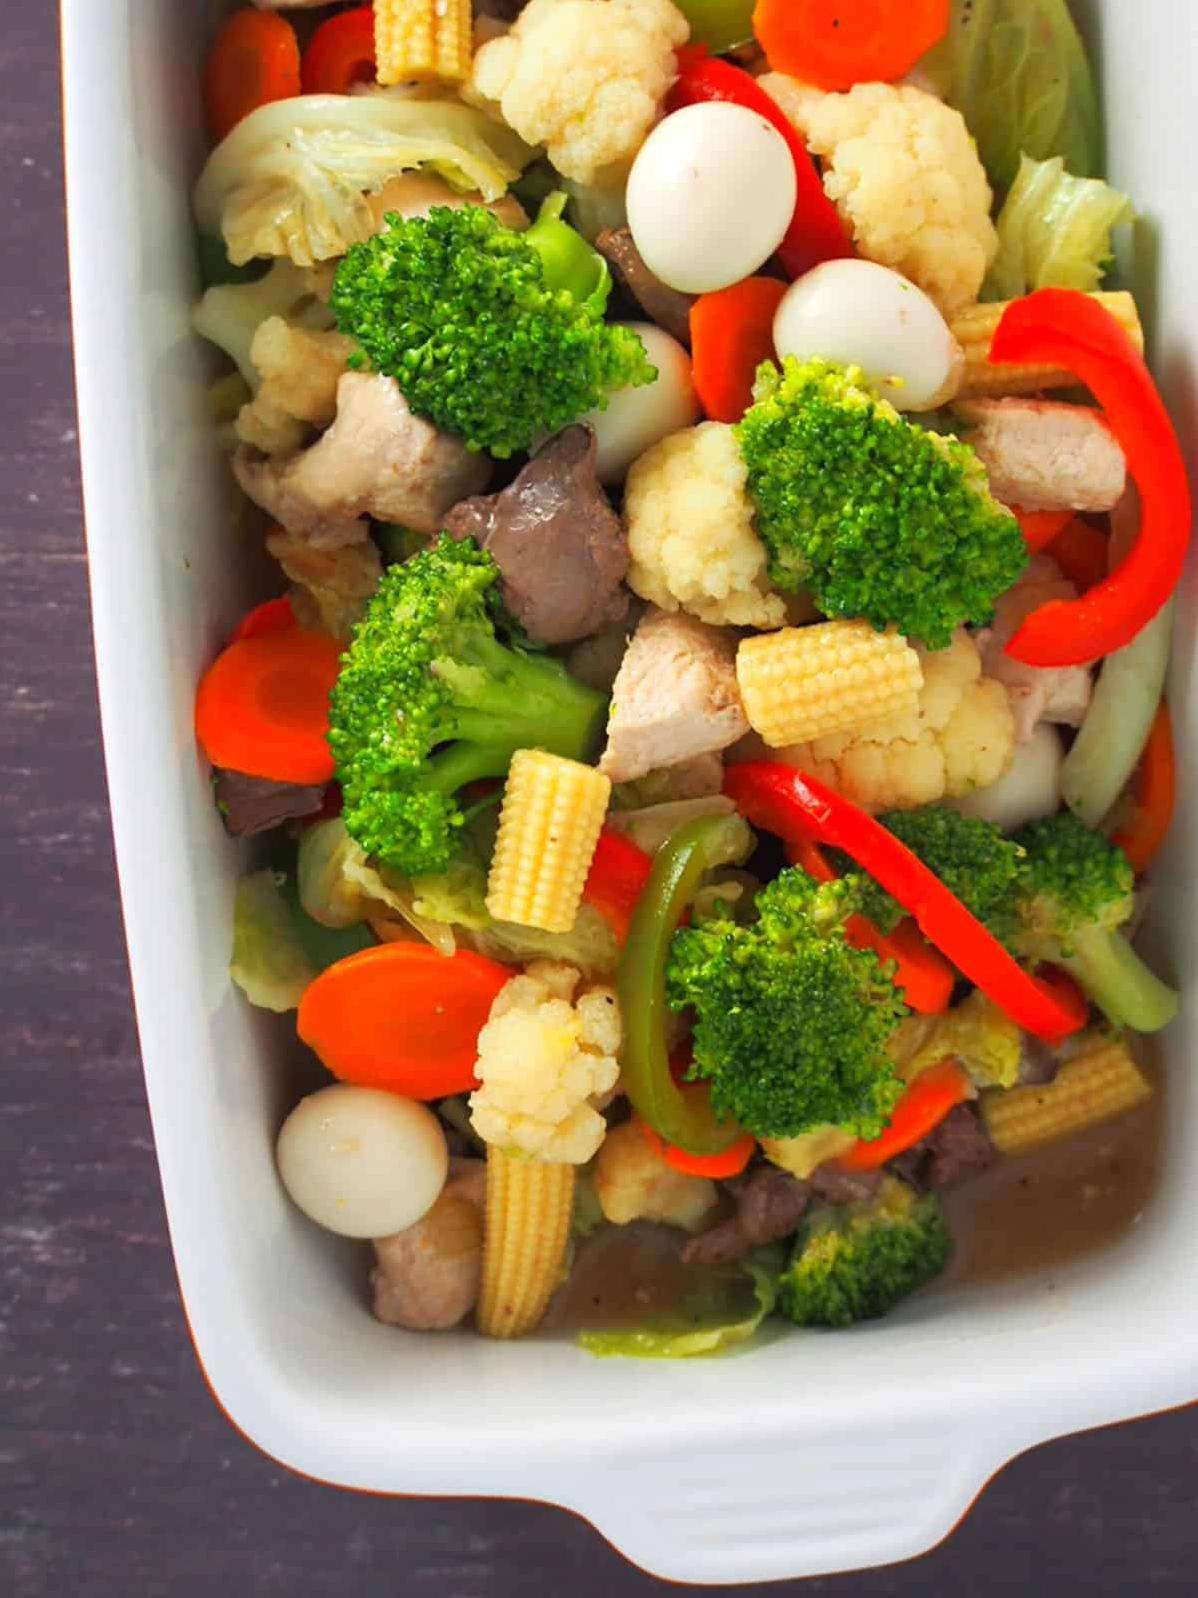  Enjoy a healthy, hearty meal with this Filipino chop suey recipe!